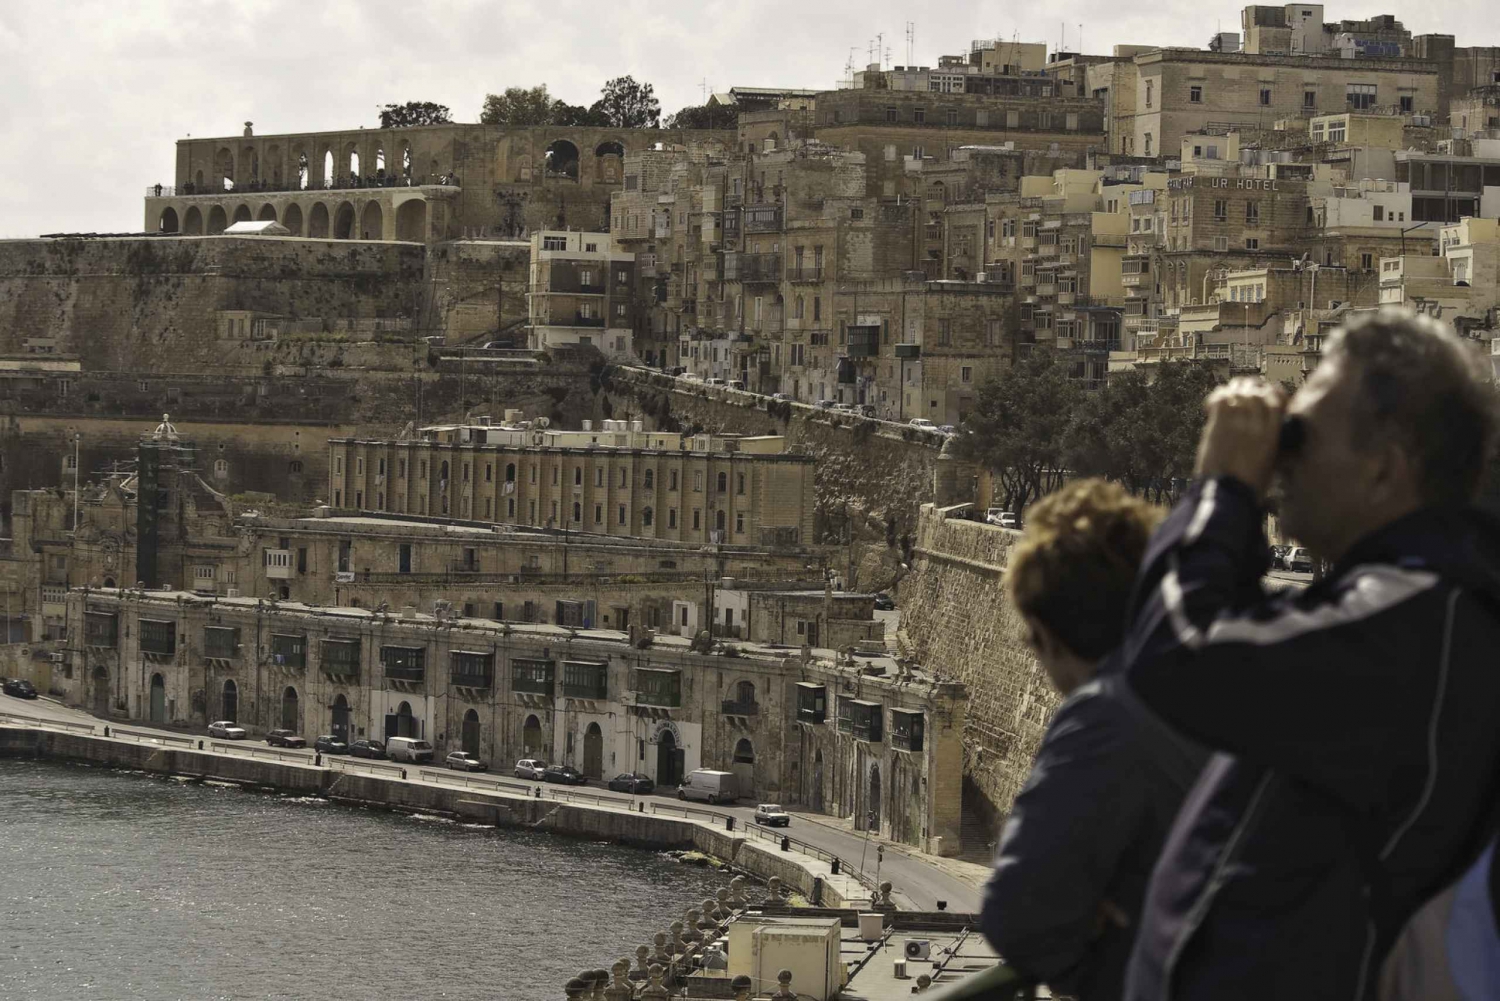 The Food and History Private Tour of Malta